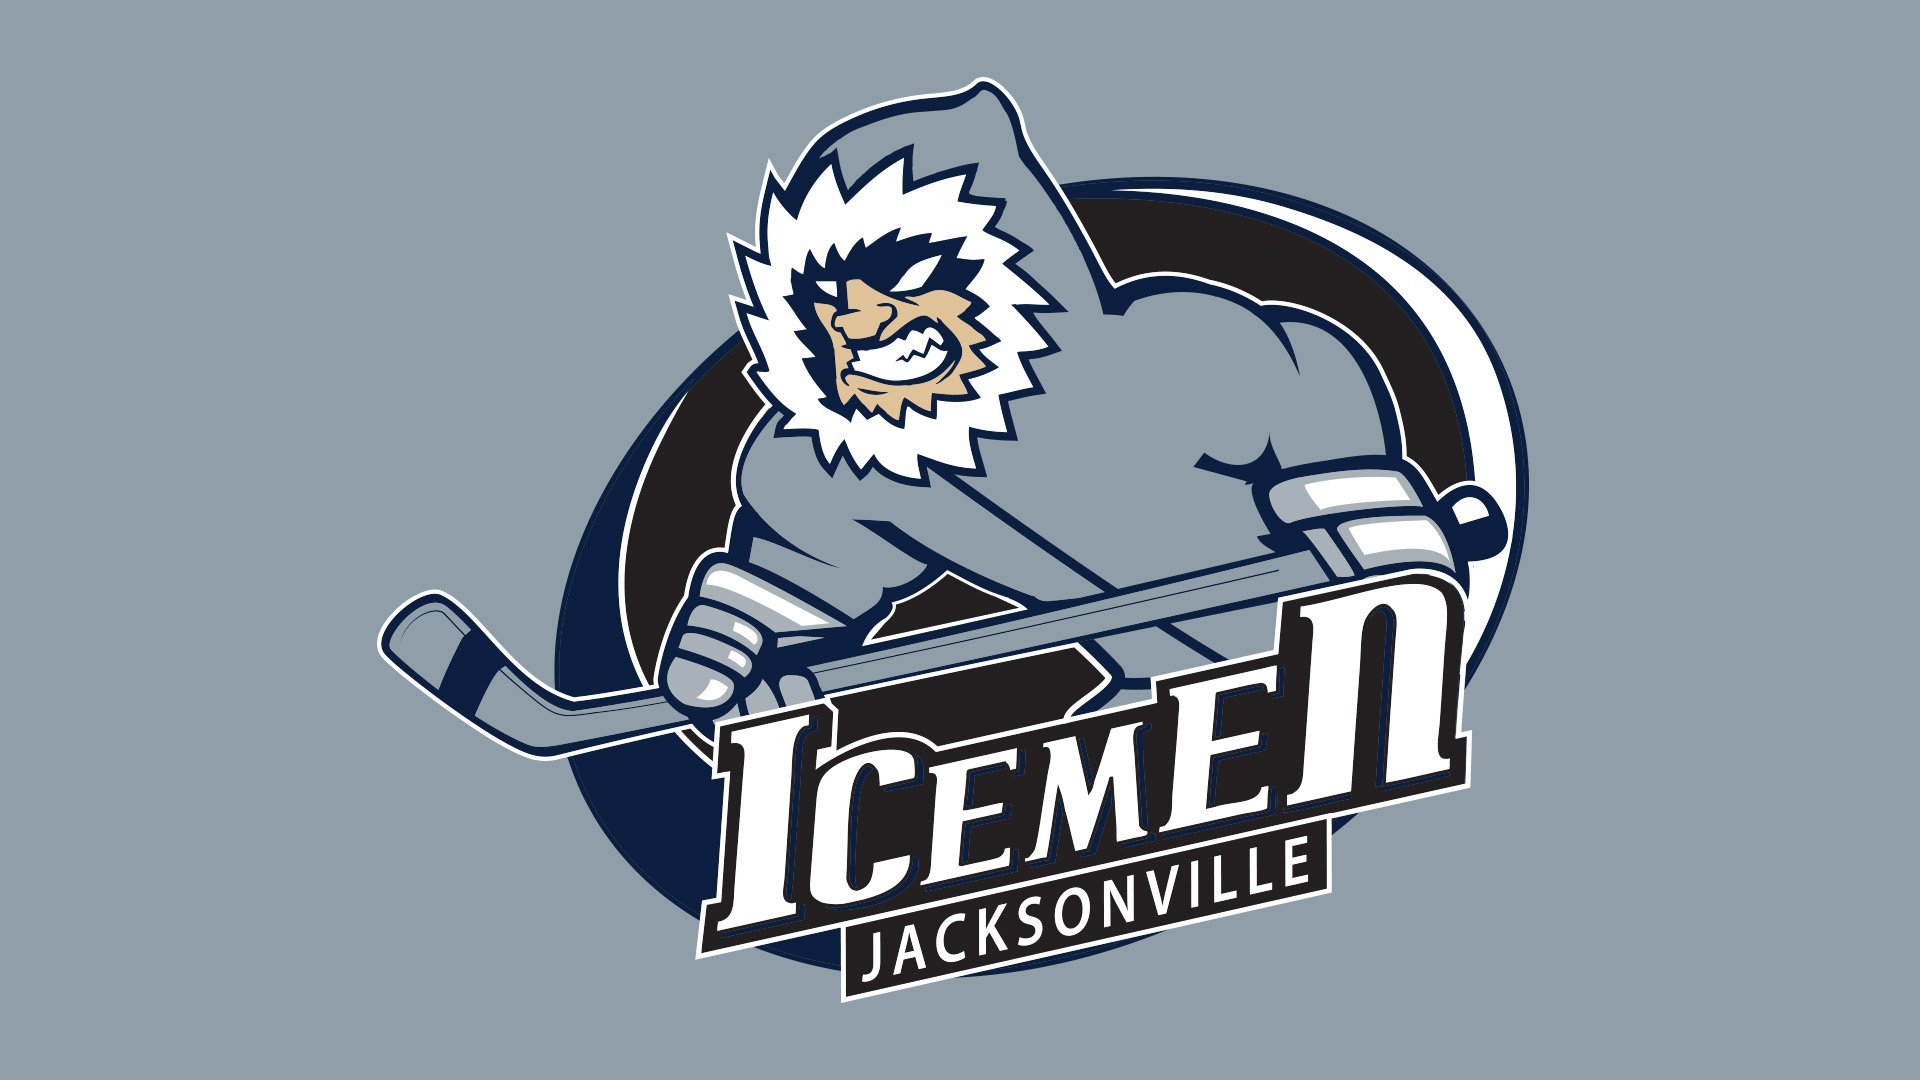 The renovated facility could resemble an igloo, playing off the Icemen team logo.